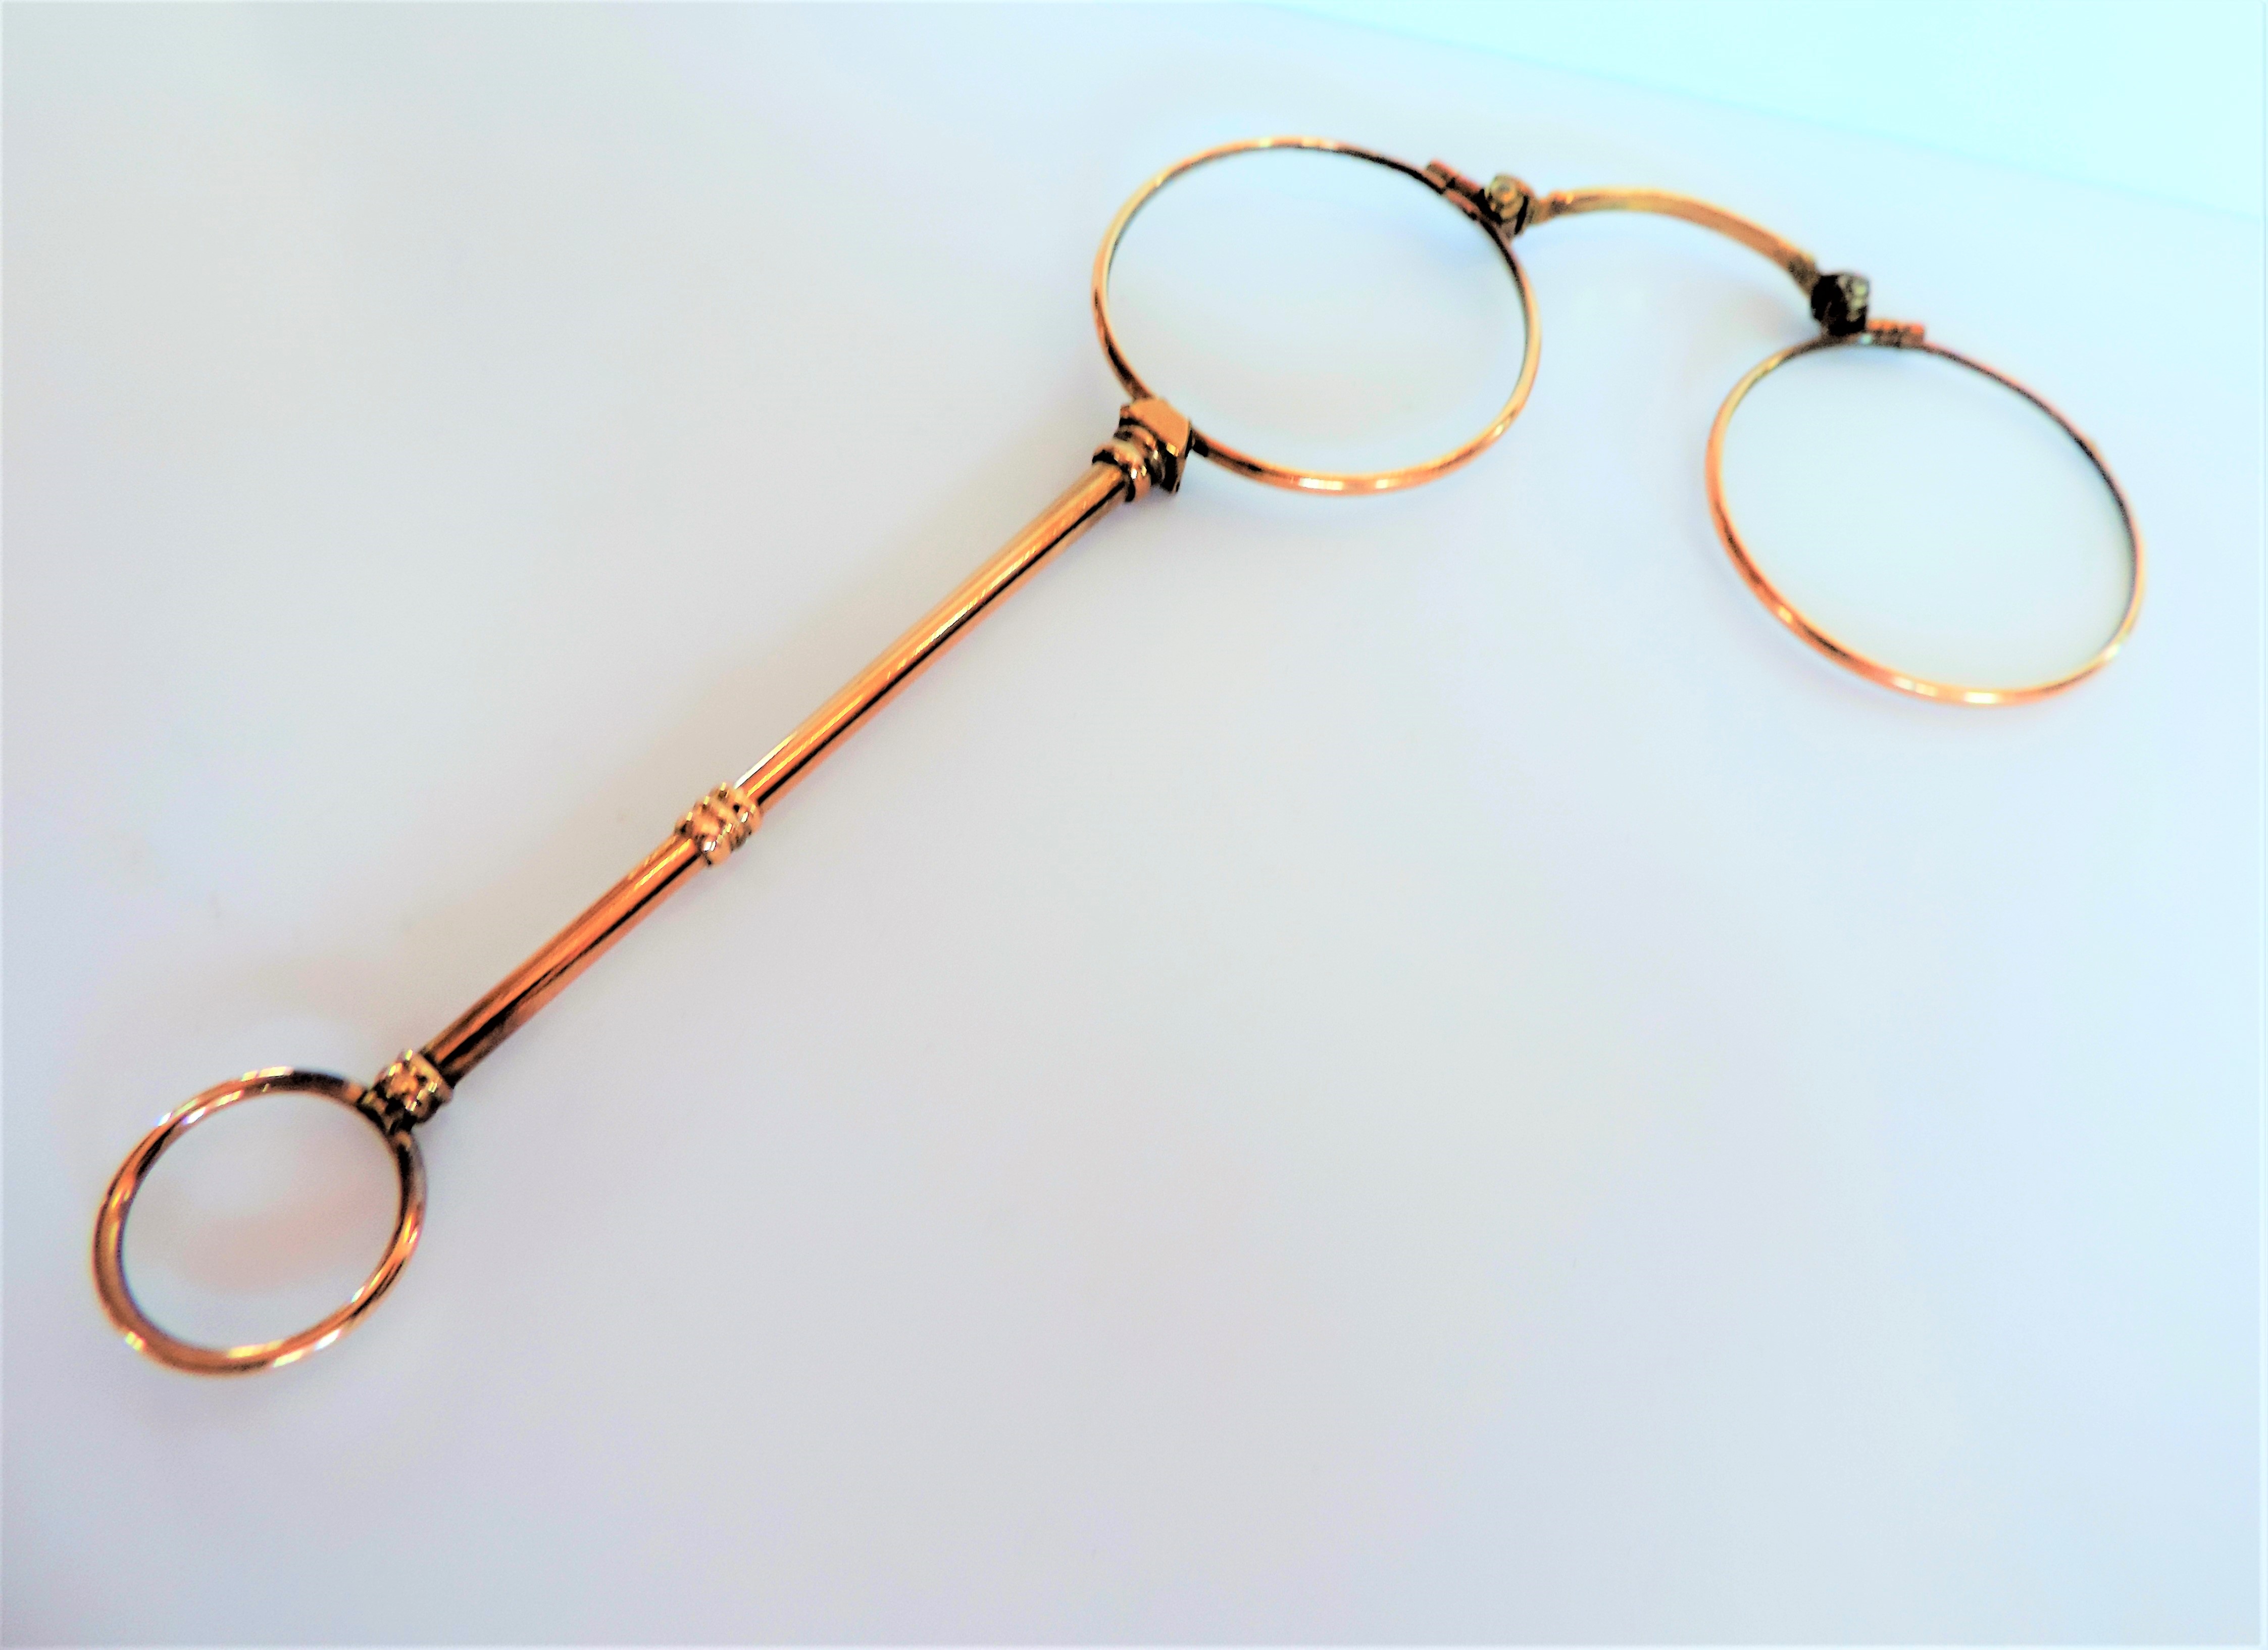 Antique Gold Plated Lorgnette Folding Glasses - Image 3 of 3